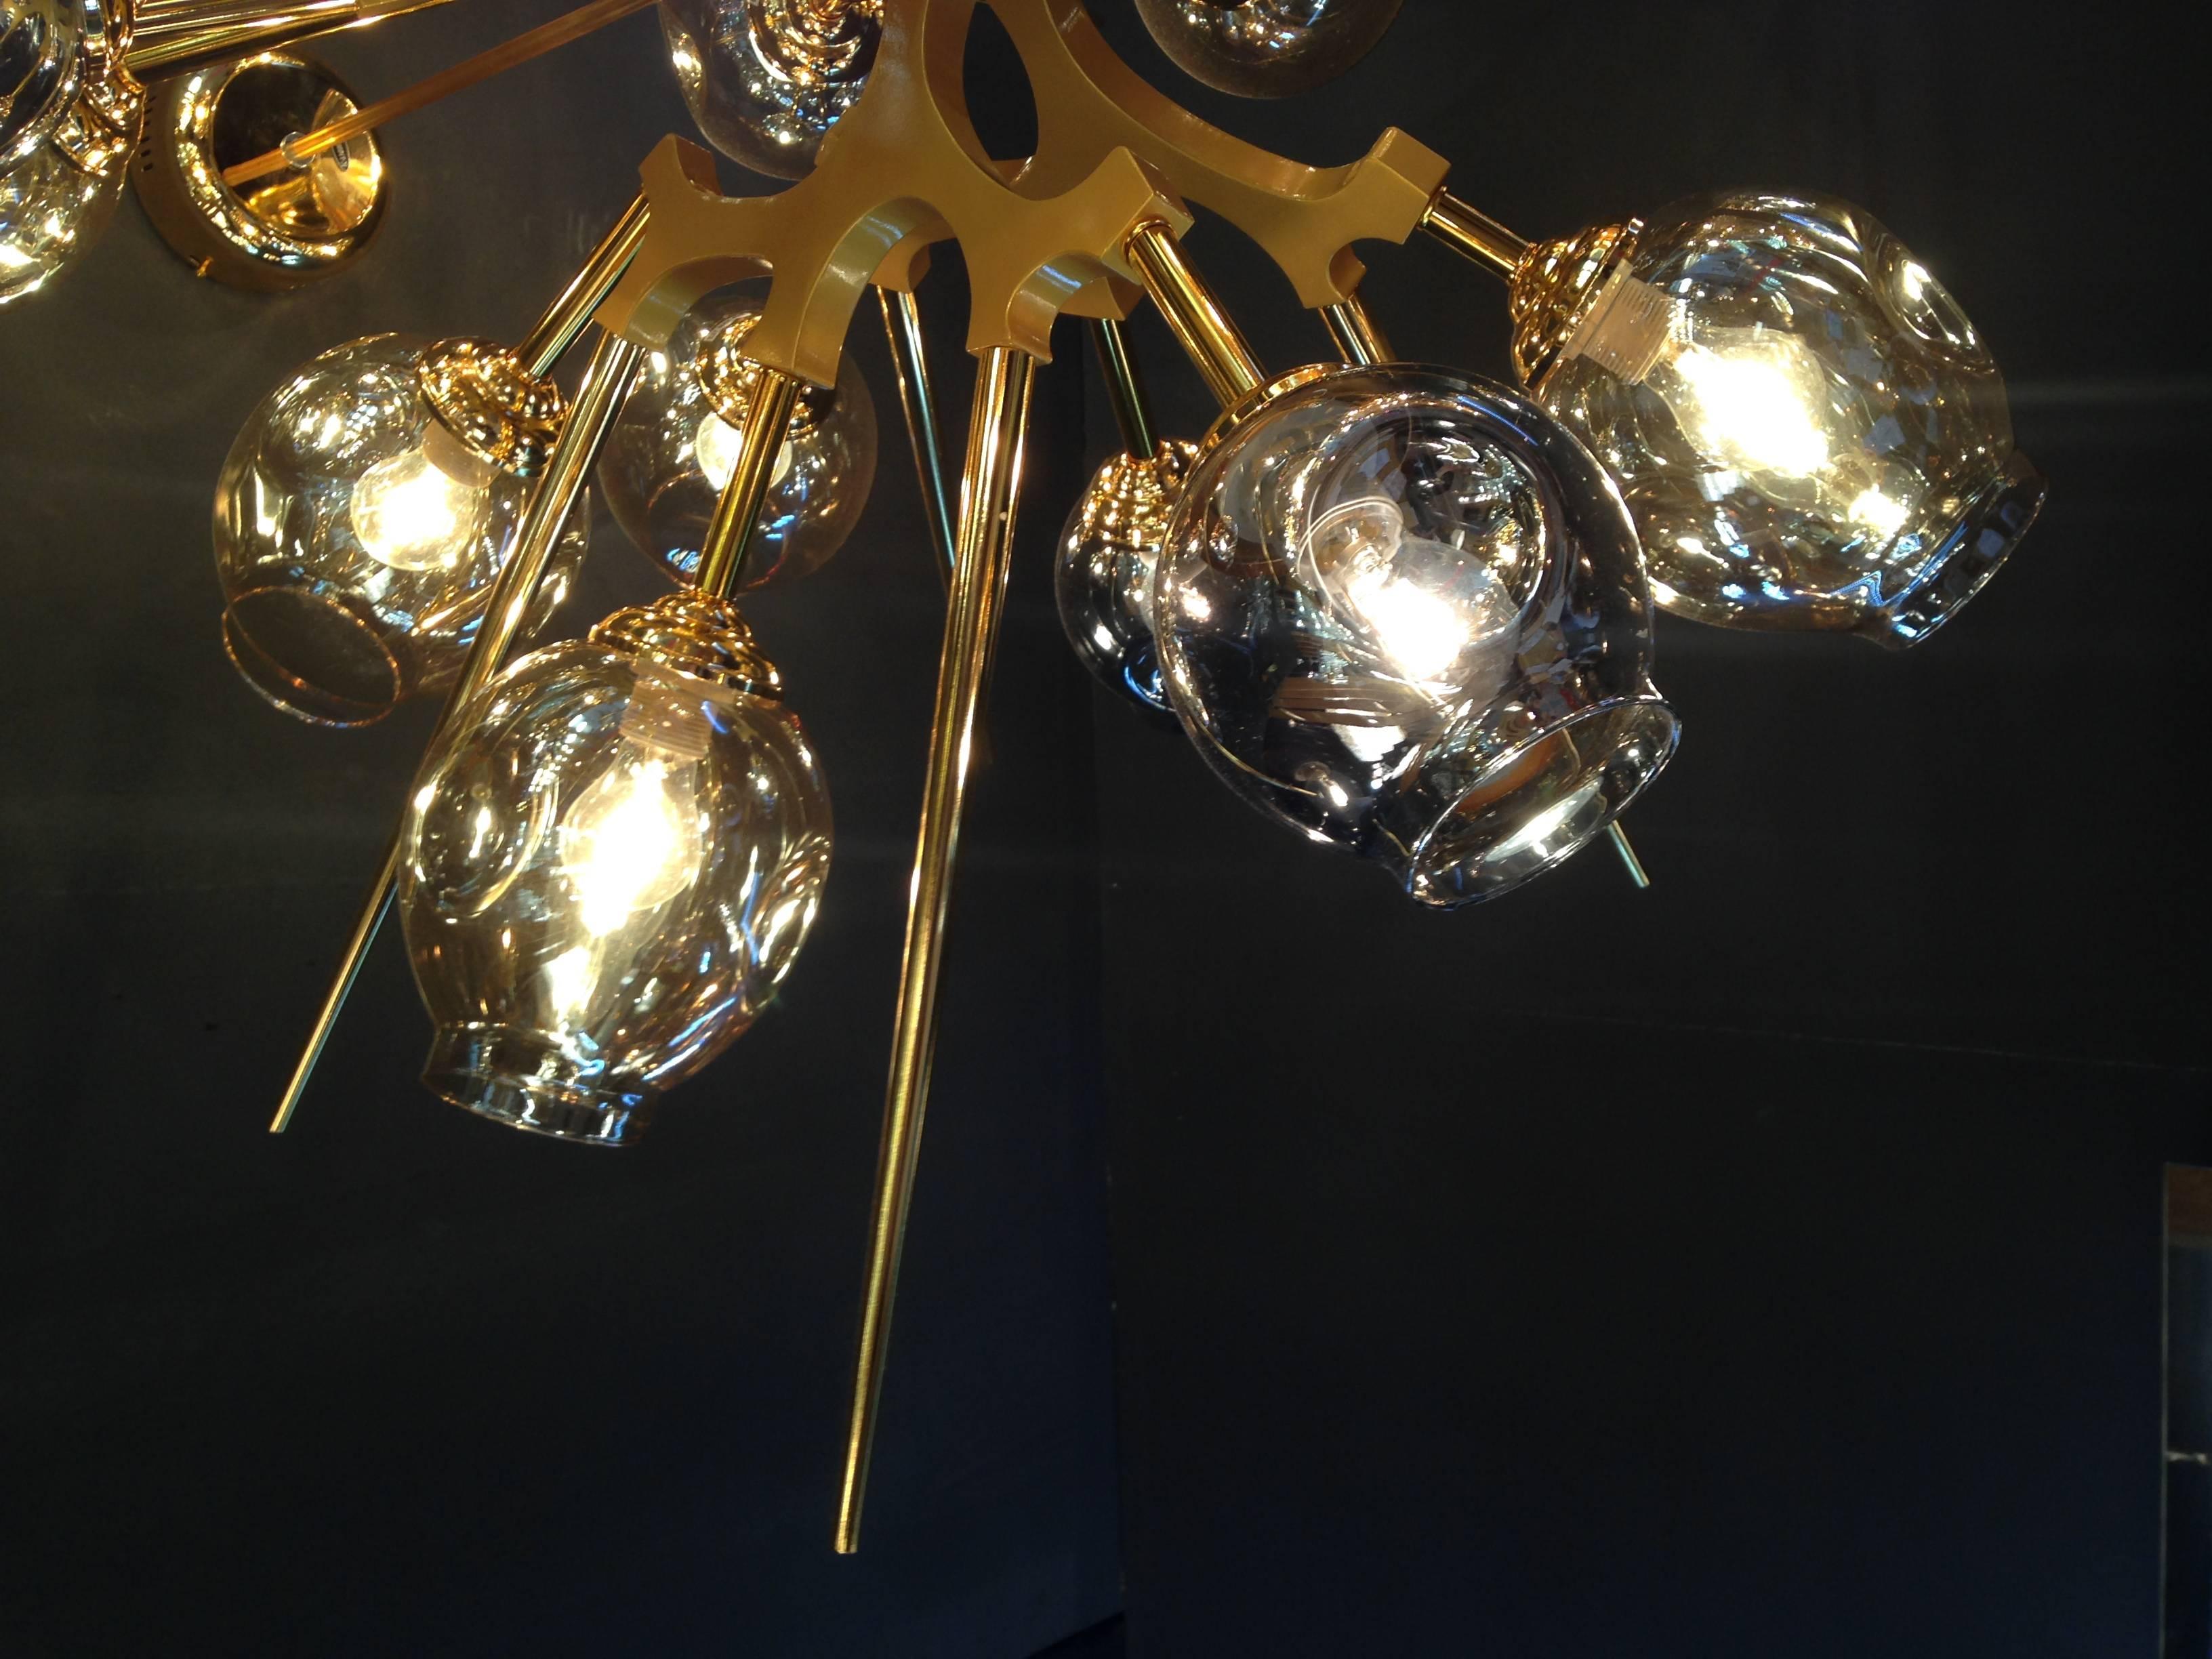 Masterful metal chandelier, 18 bulbs of warm light. Very graphic and Atipyque